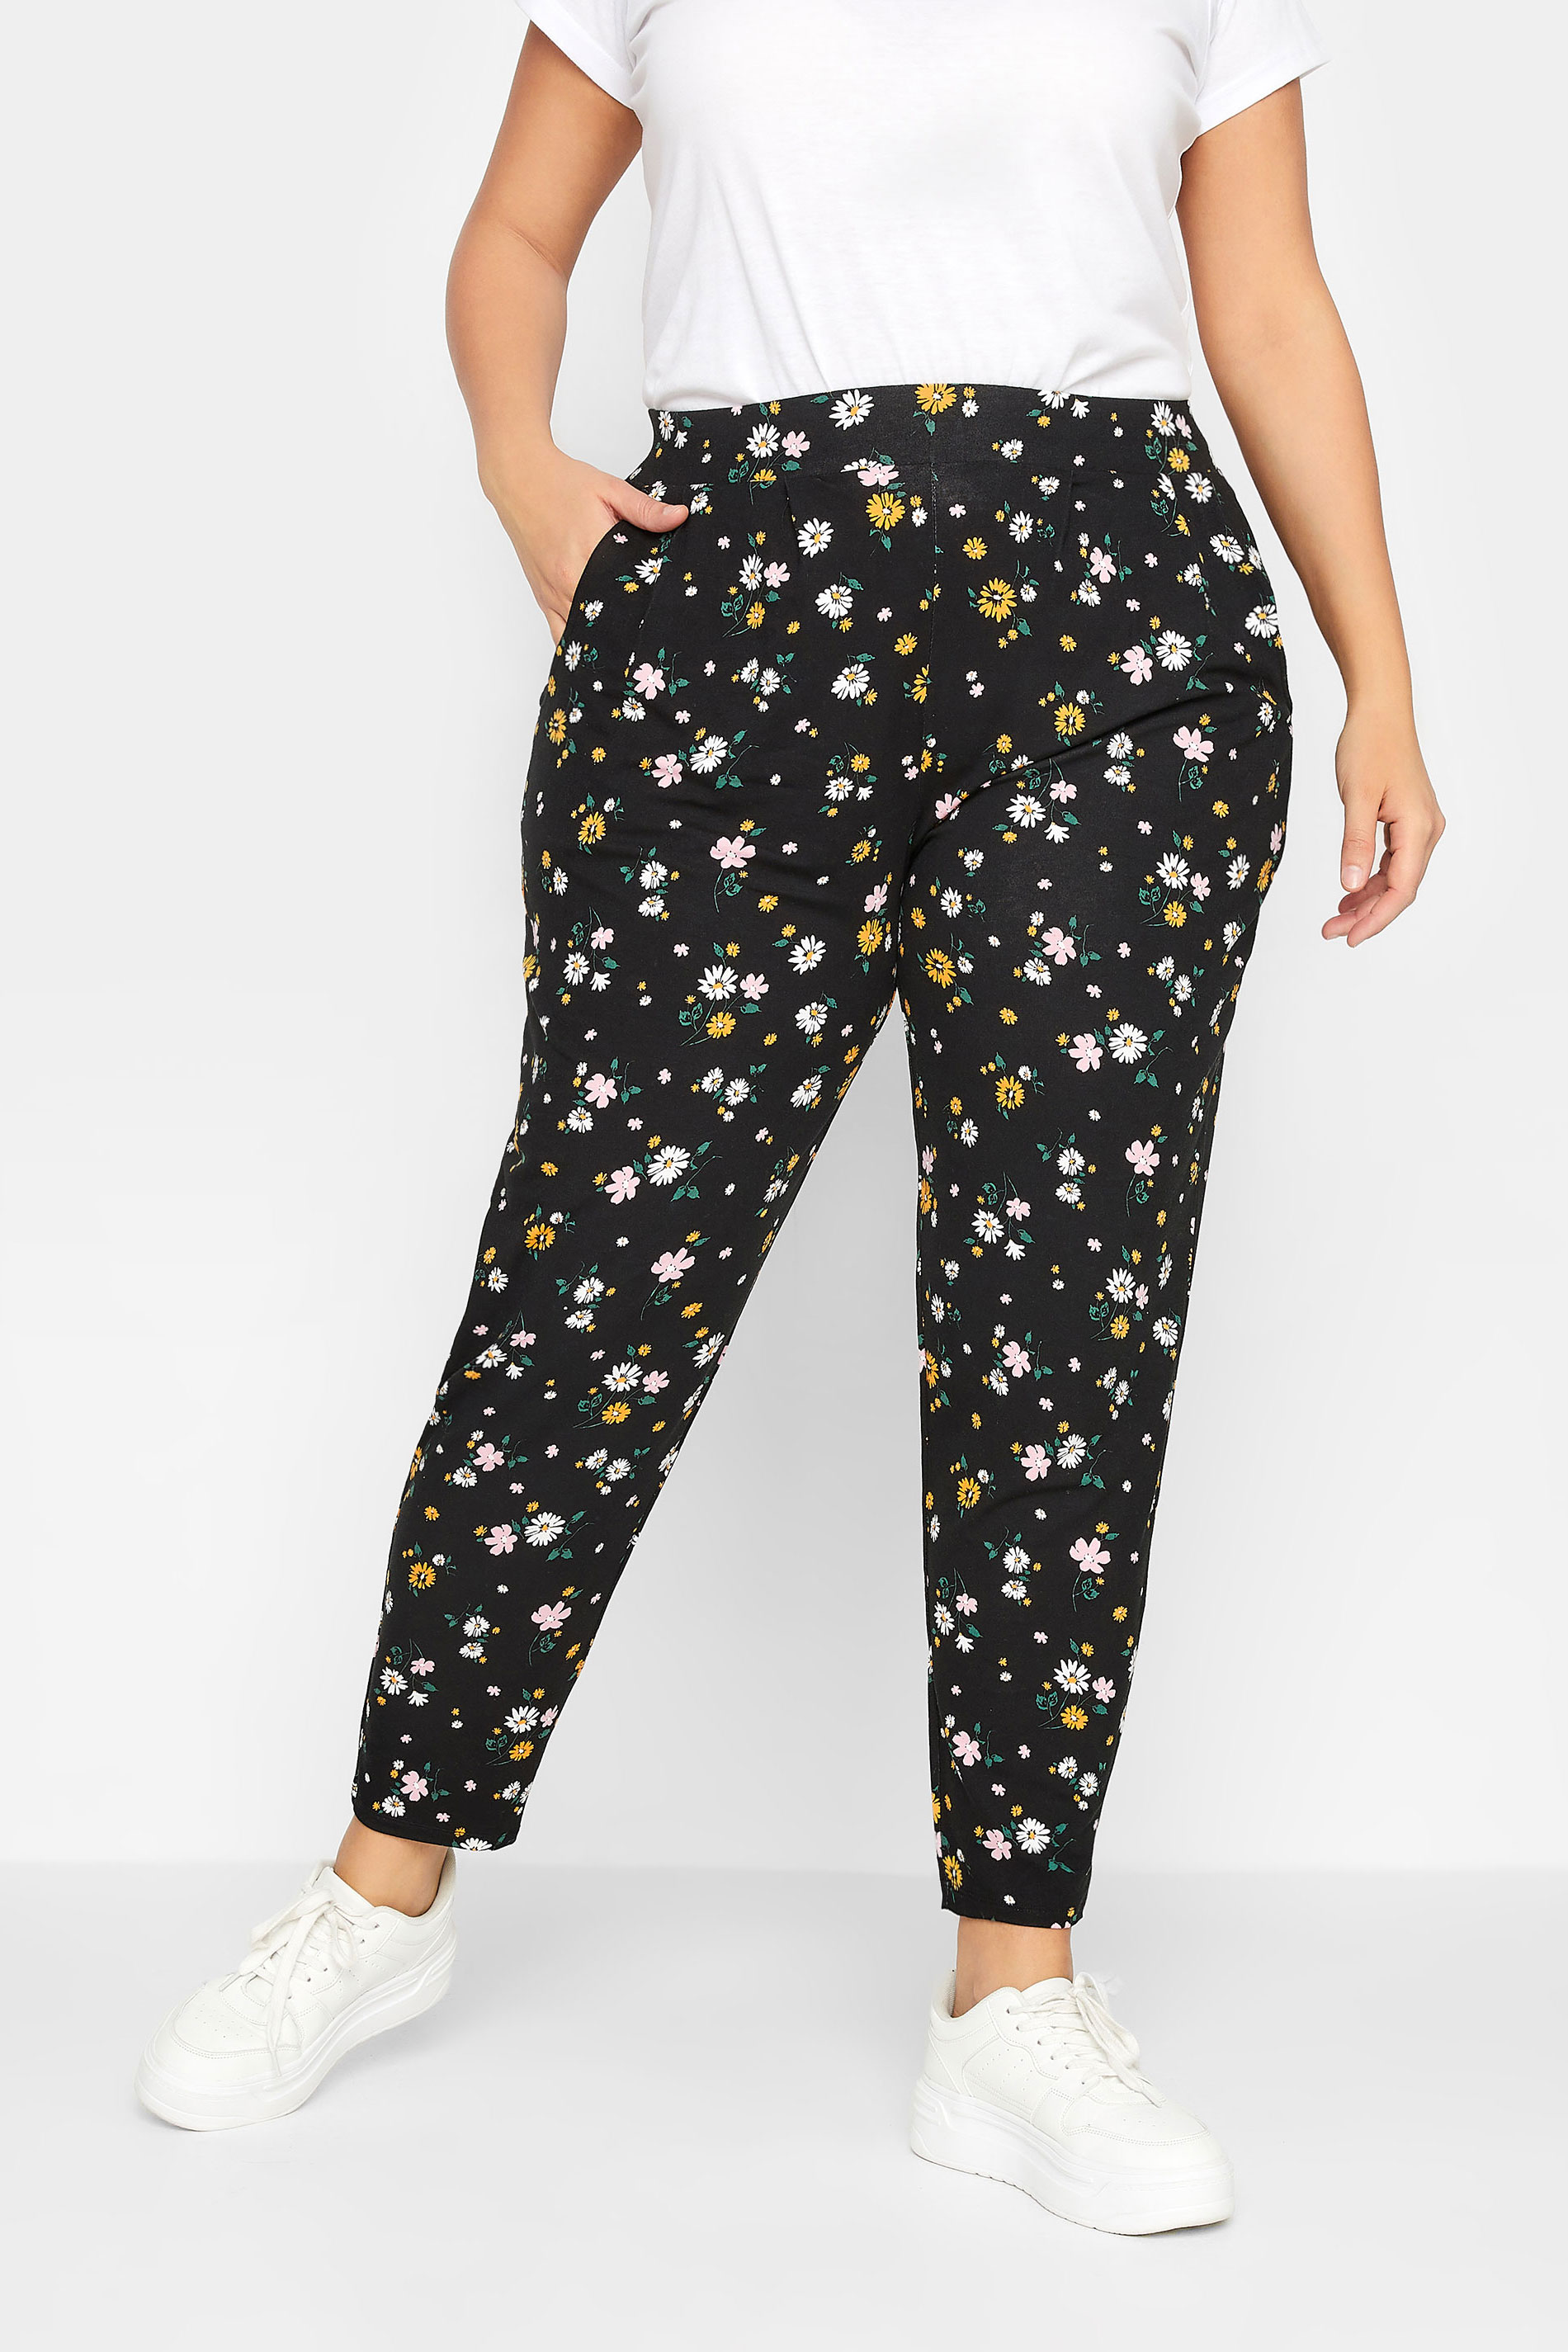 YOURS Plus Size Black Floral Print Harem Trousers | Yours Clothing  1